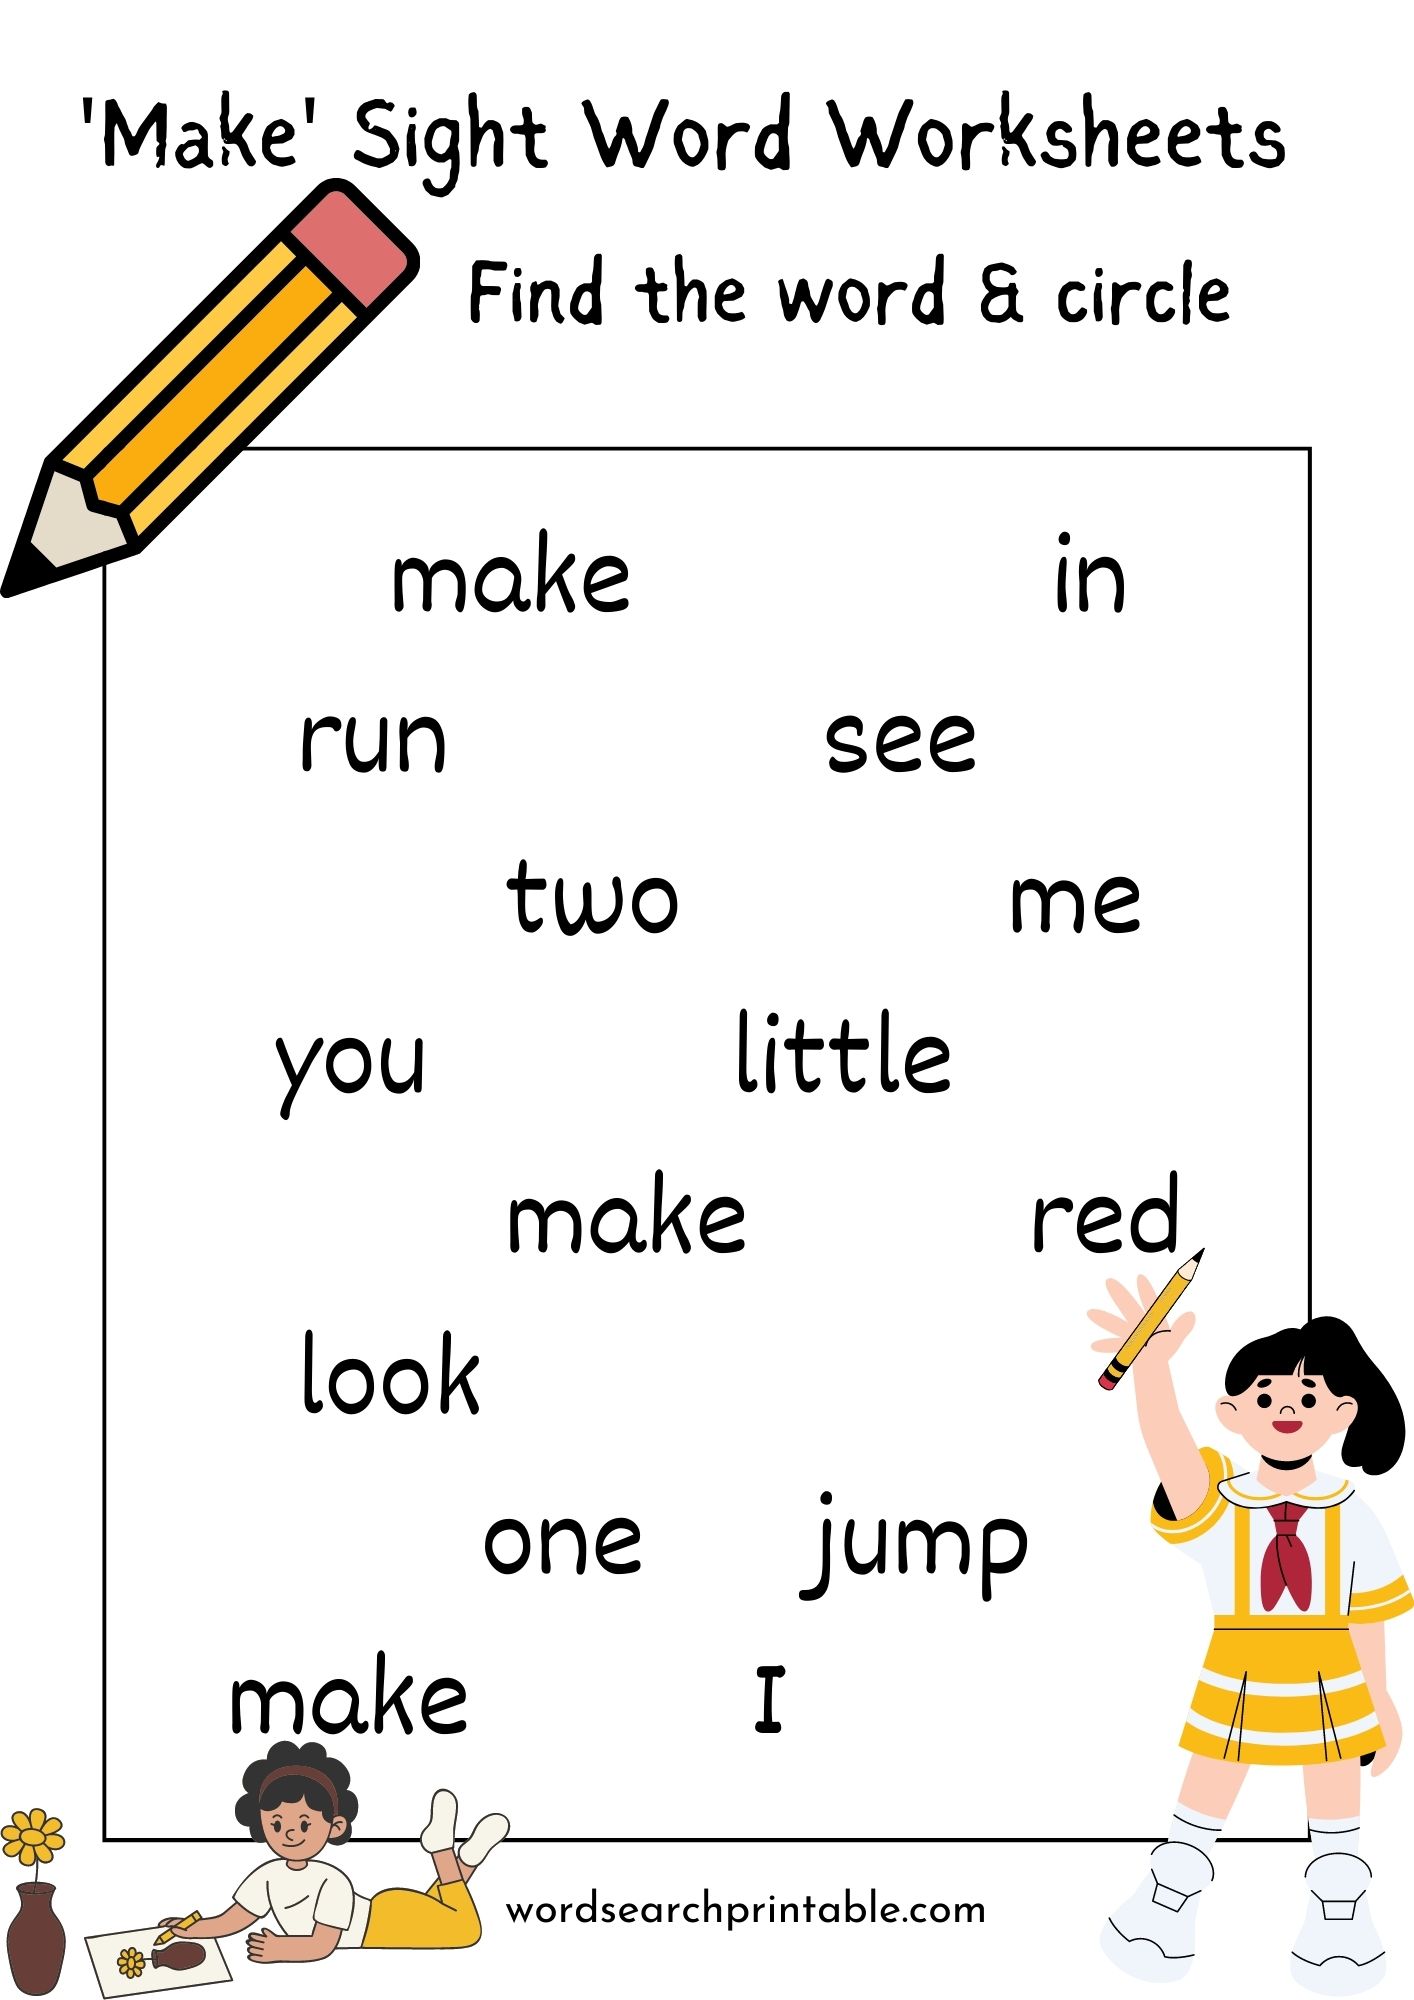 Find the sight word Make and circle it